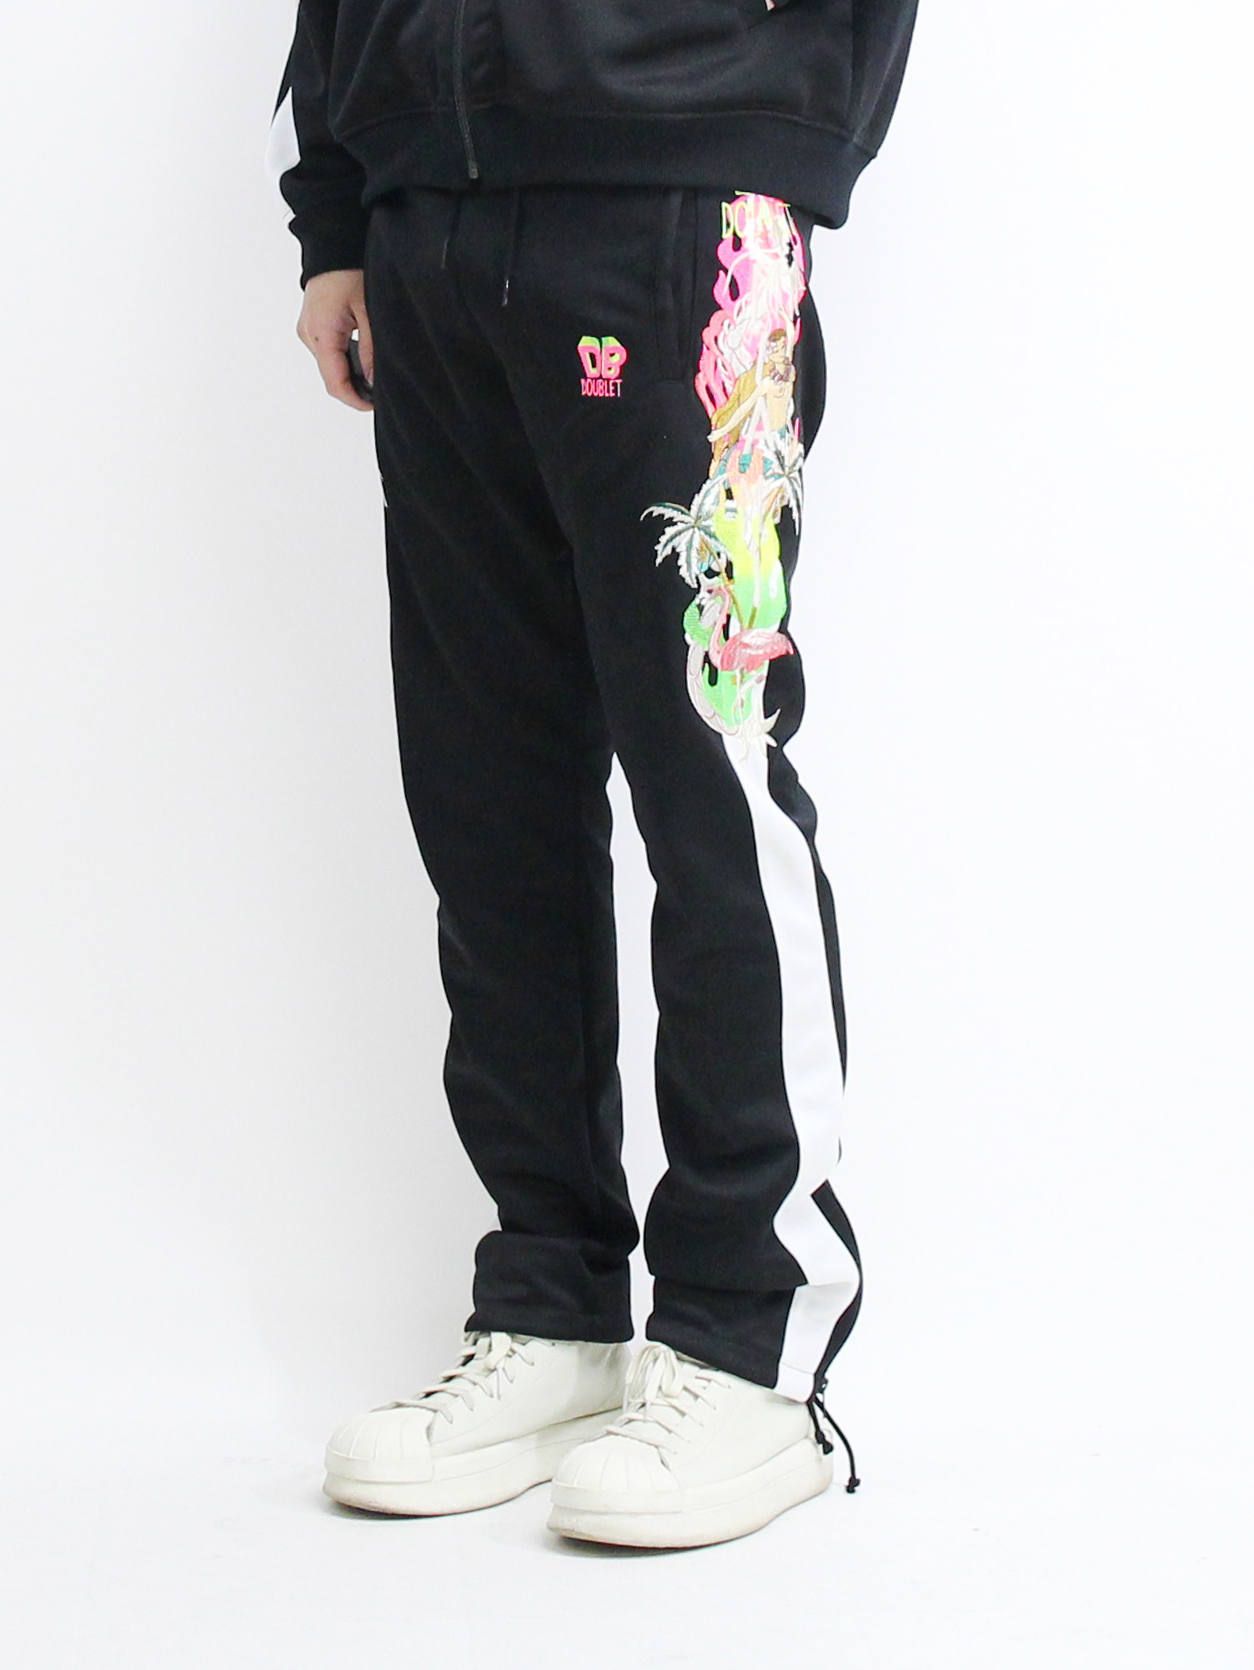 doublet - 19SSカオス刺繍トラックパンツ - CHAOS EMBROIDERY TRACK PANTS - BLACK | ADDICT  WEB SHOP